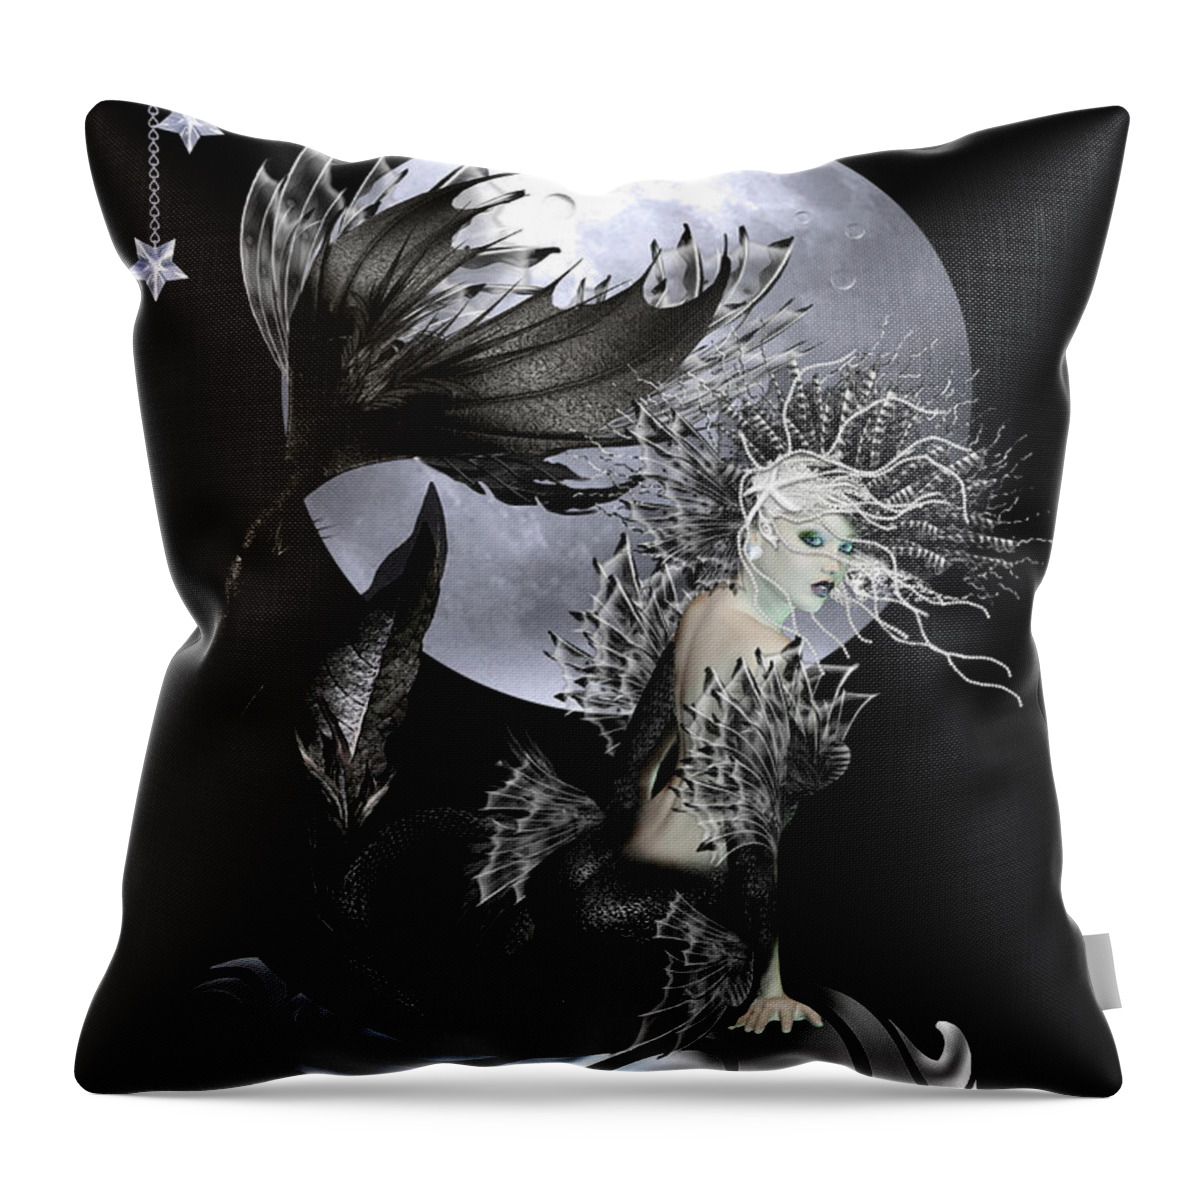 Mermaid Throw Pillow featuring the digital art Pearl by Shanina Conway